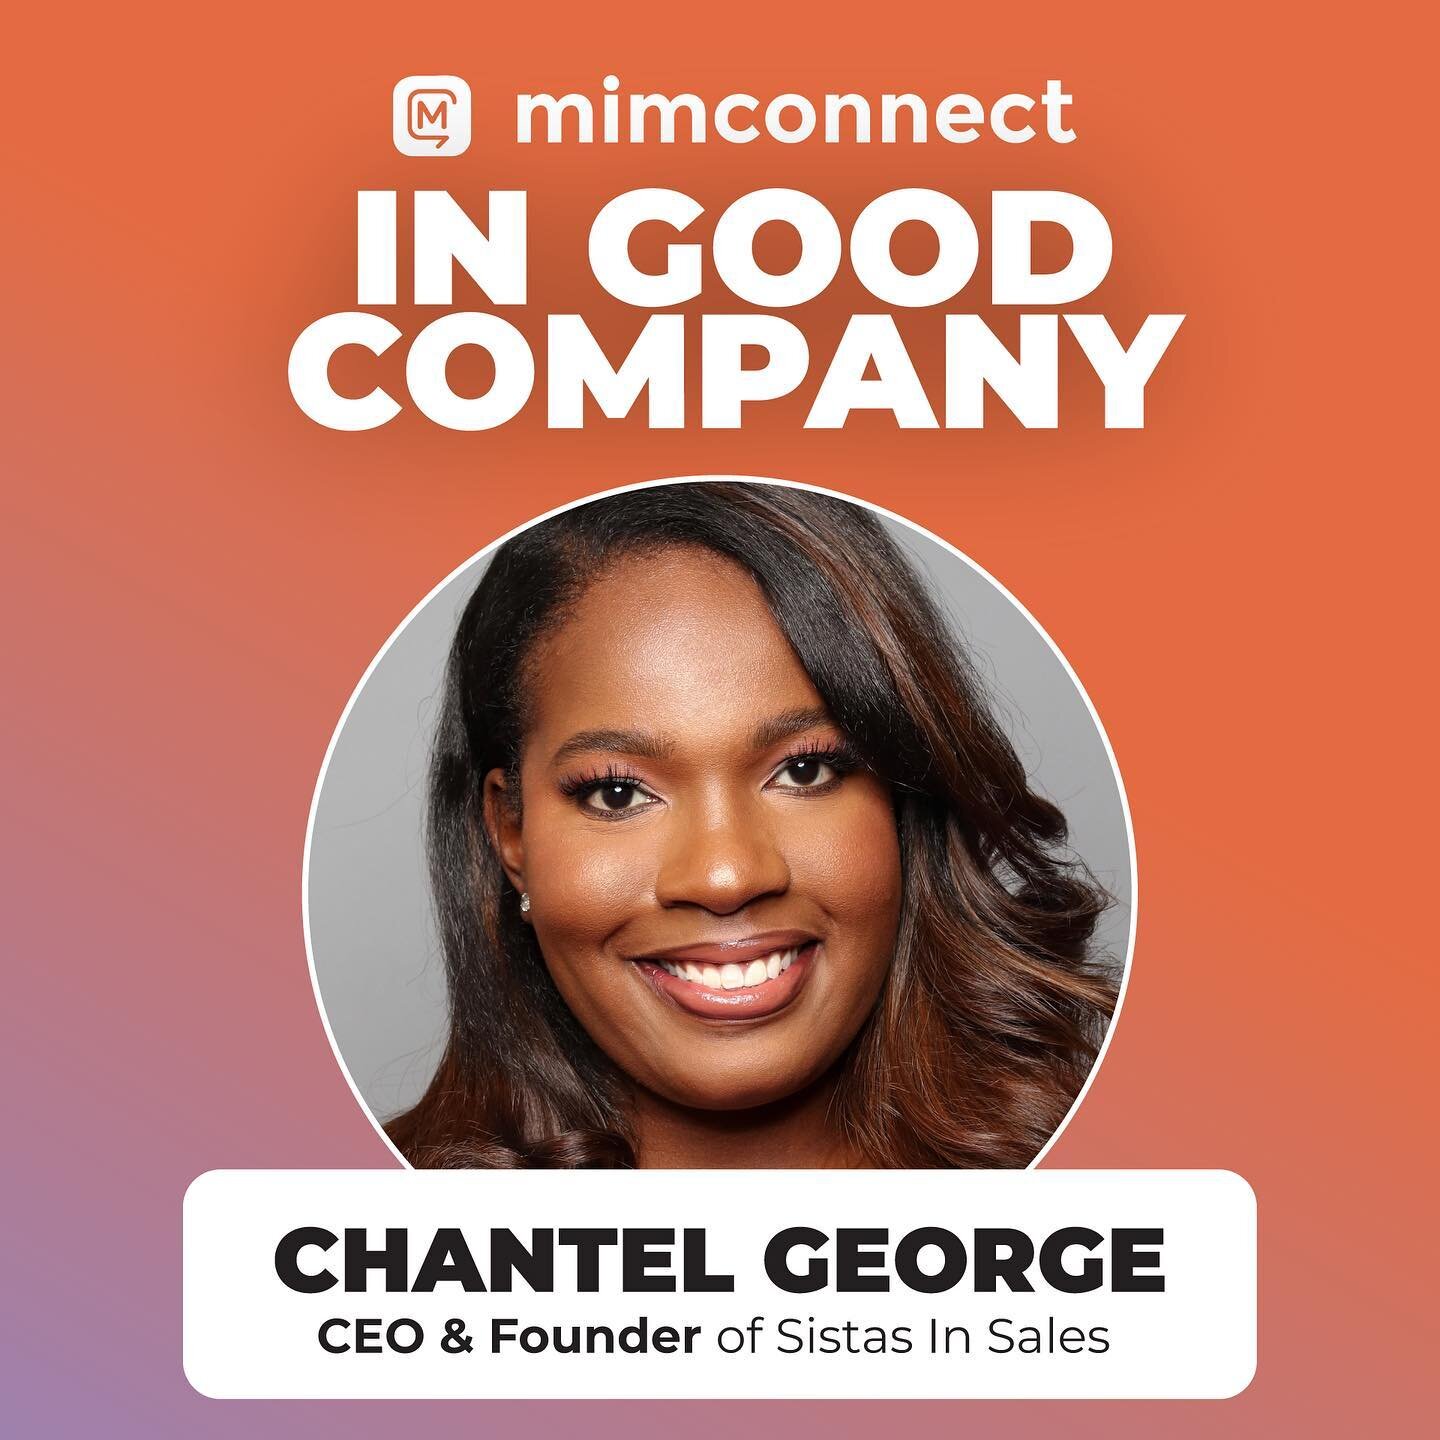 Are you looking to level up in your career this year? Look no further than @mimconnect In Good Company virtual conference &amp; career fair. Presented by Intuit Mailchimp and with guidance from The White House's Initiative on HBCUs, In Good Company i